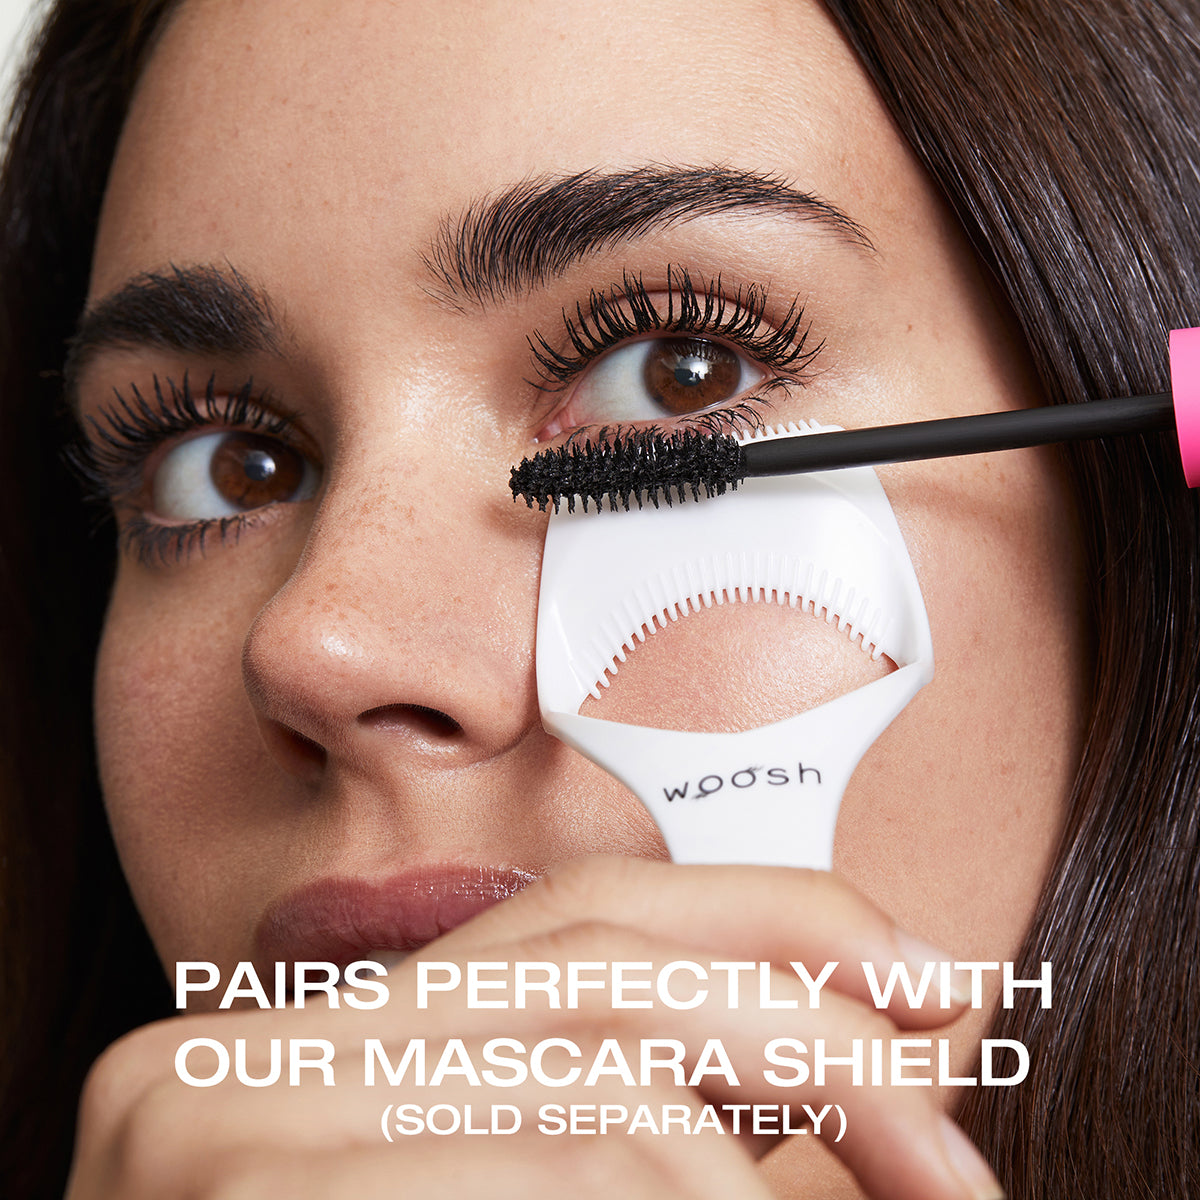  Woman using the mascara shield and mascara wand with text saying it pairs perfectly with our mascara shield (sold separately)